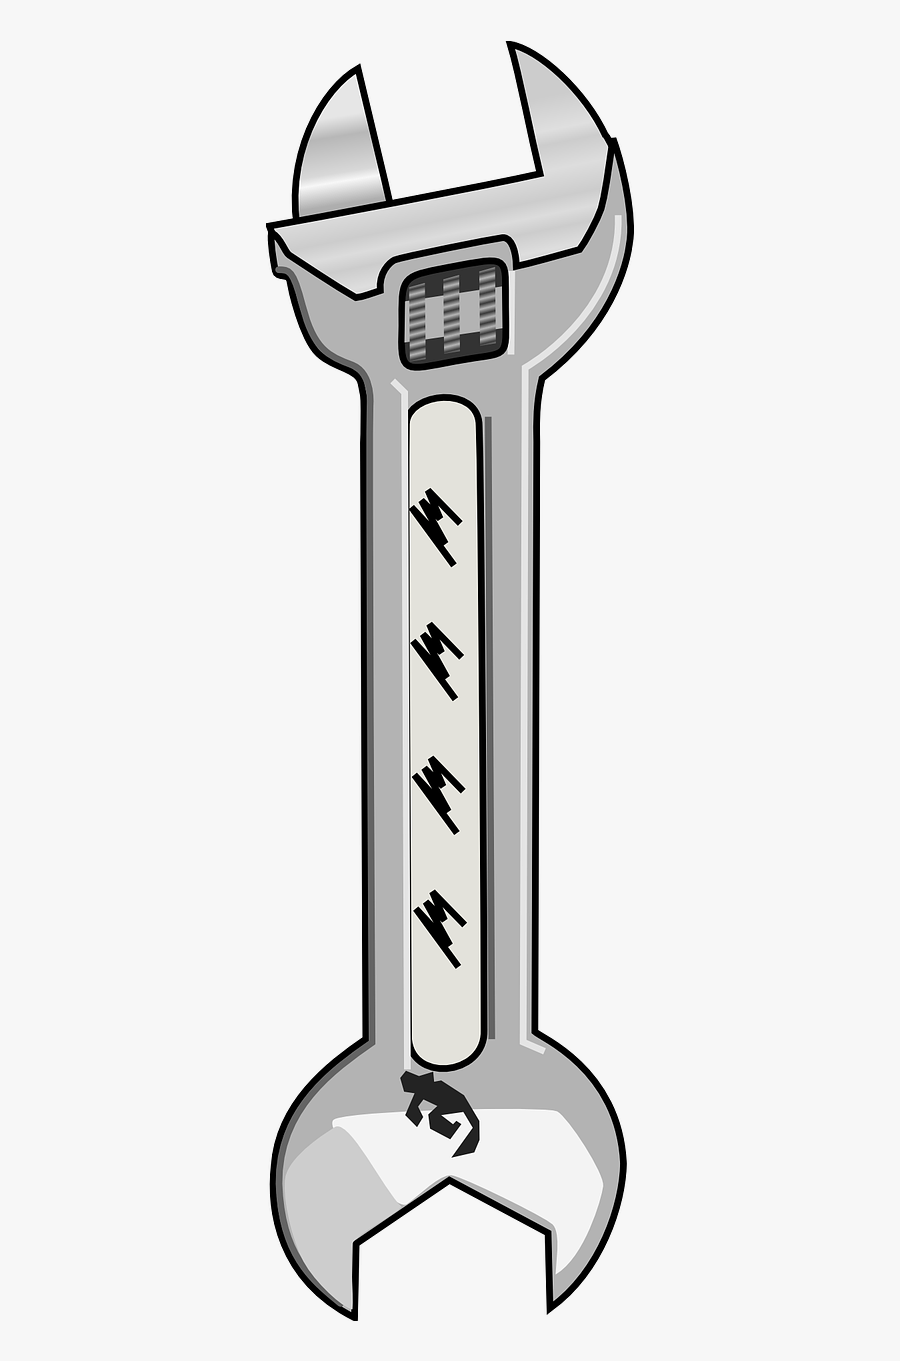 Wrench Adjustable Hardware Free Picture - Hardware Logo In Png, Transparent Clipart